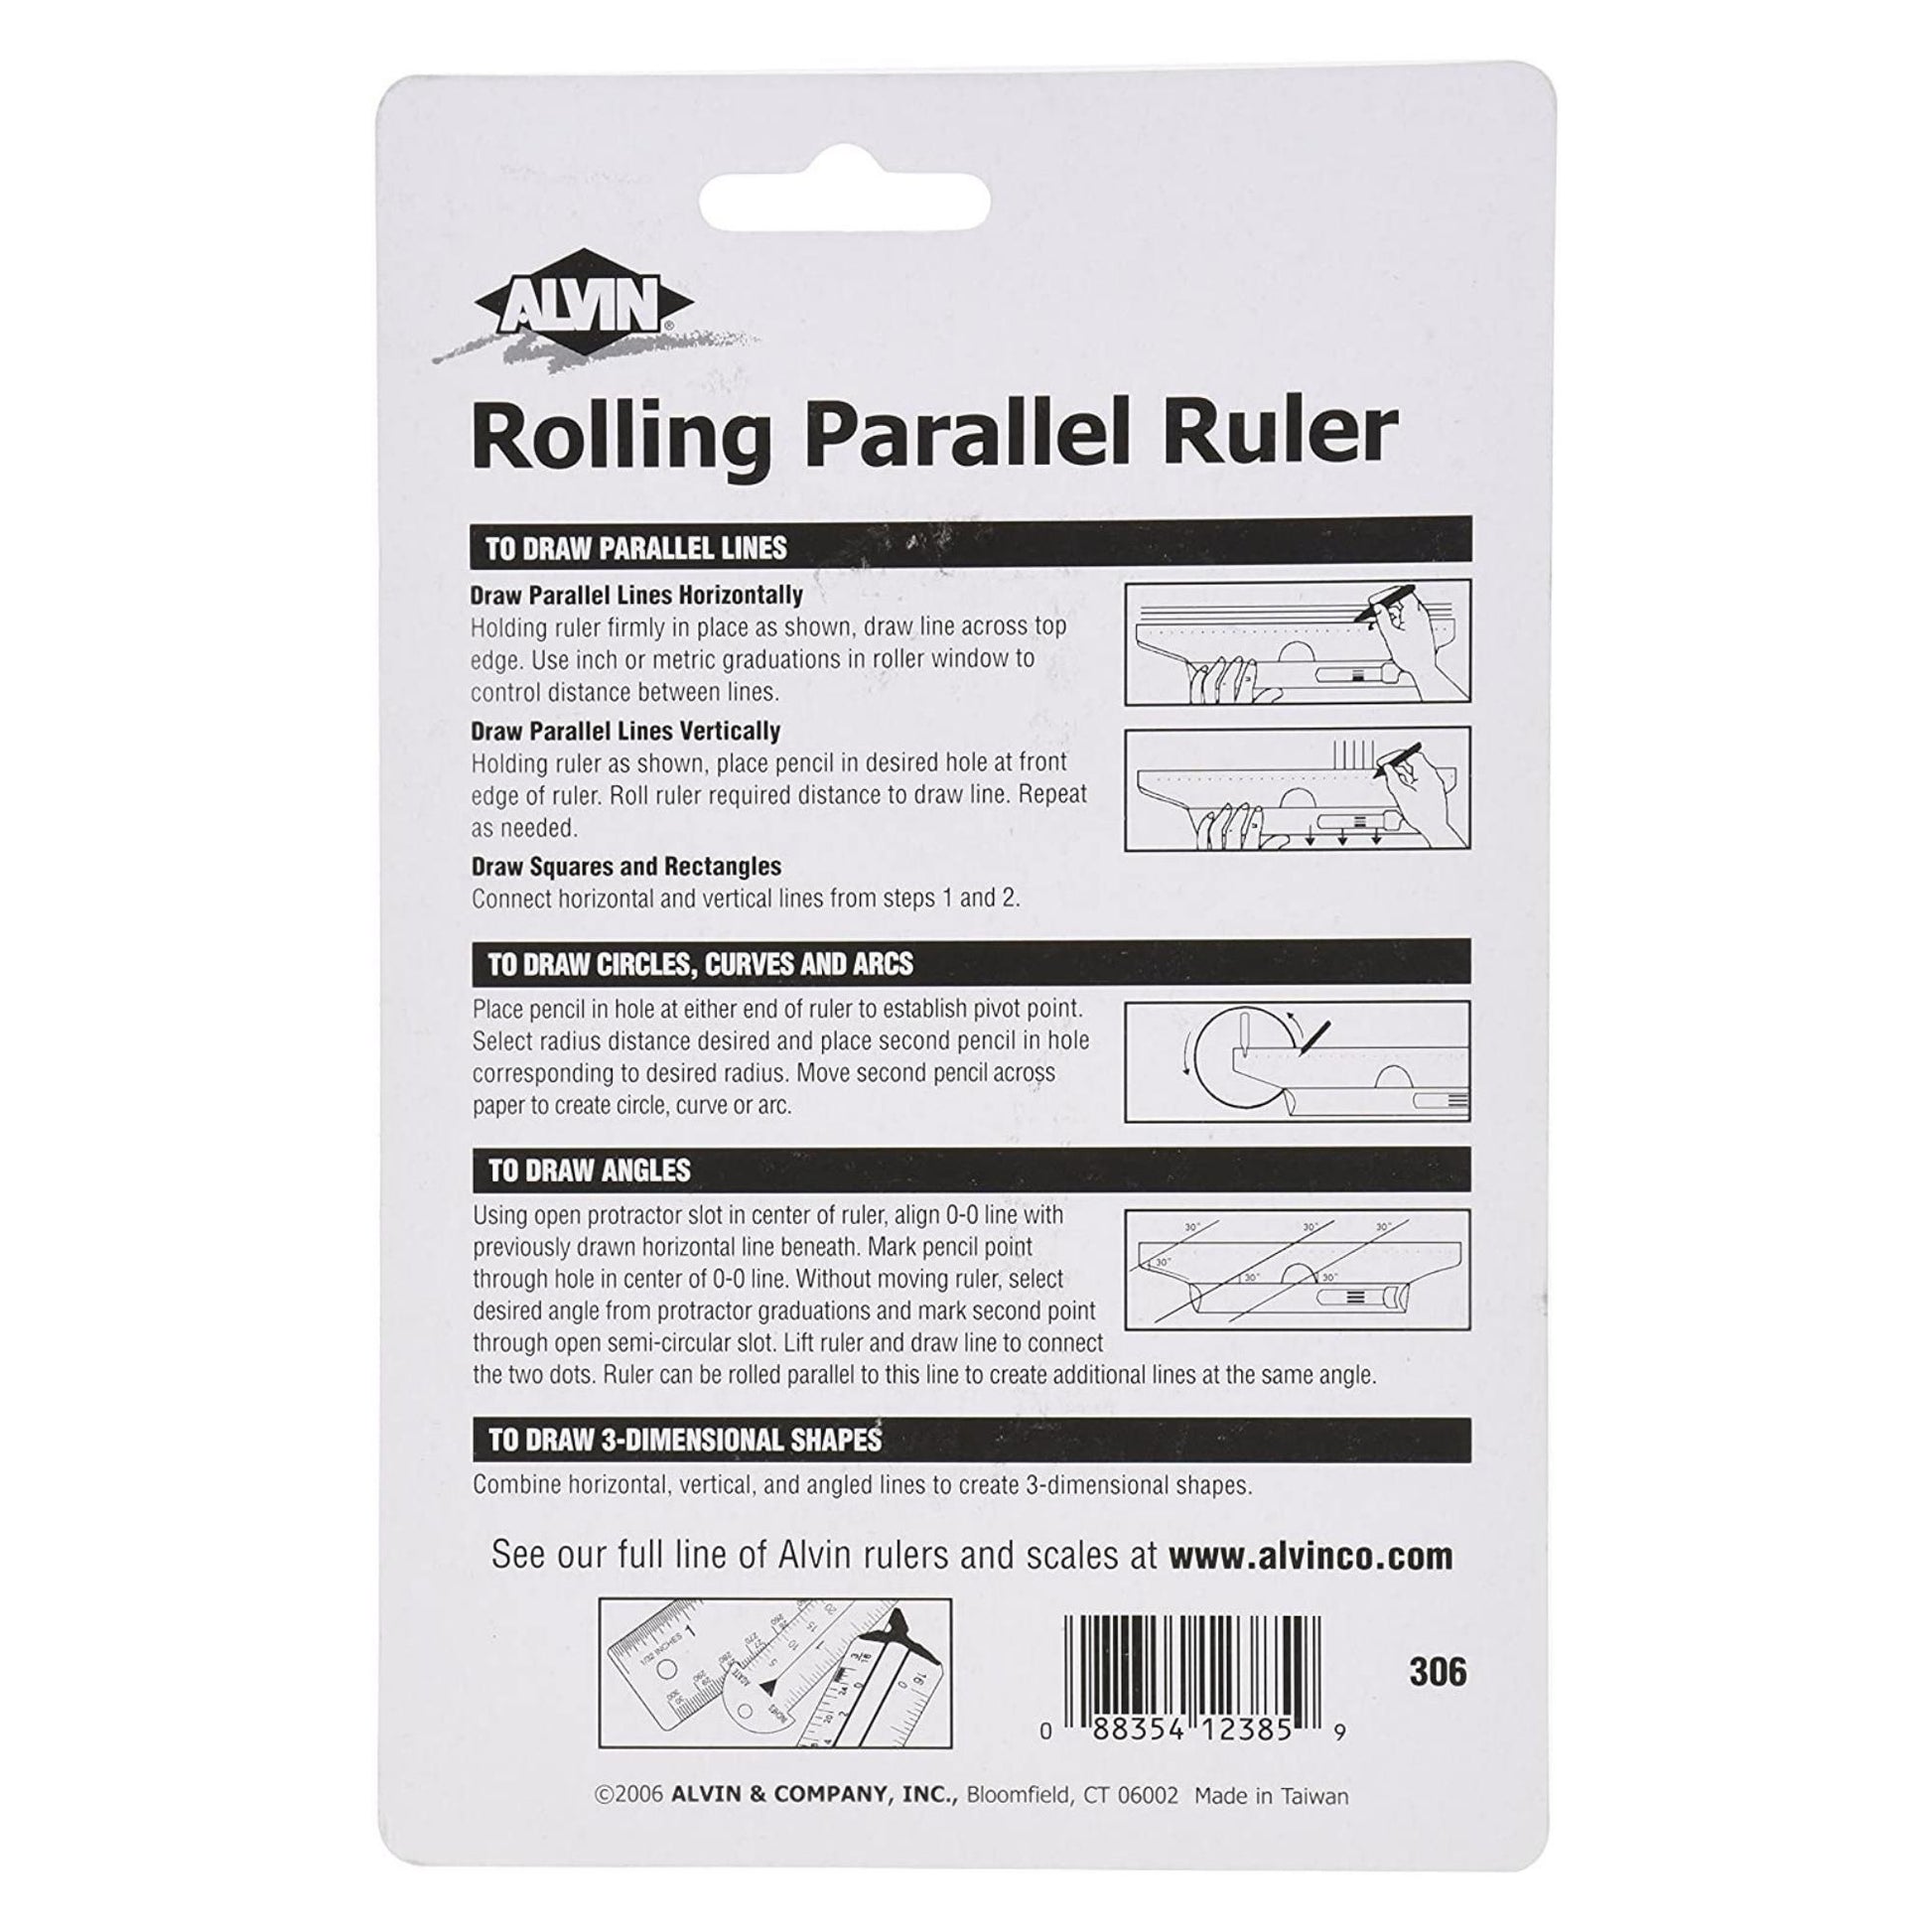 Alvin - Parallel Rolling Ruler #312 - New in Box